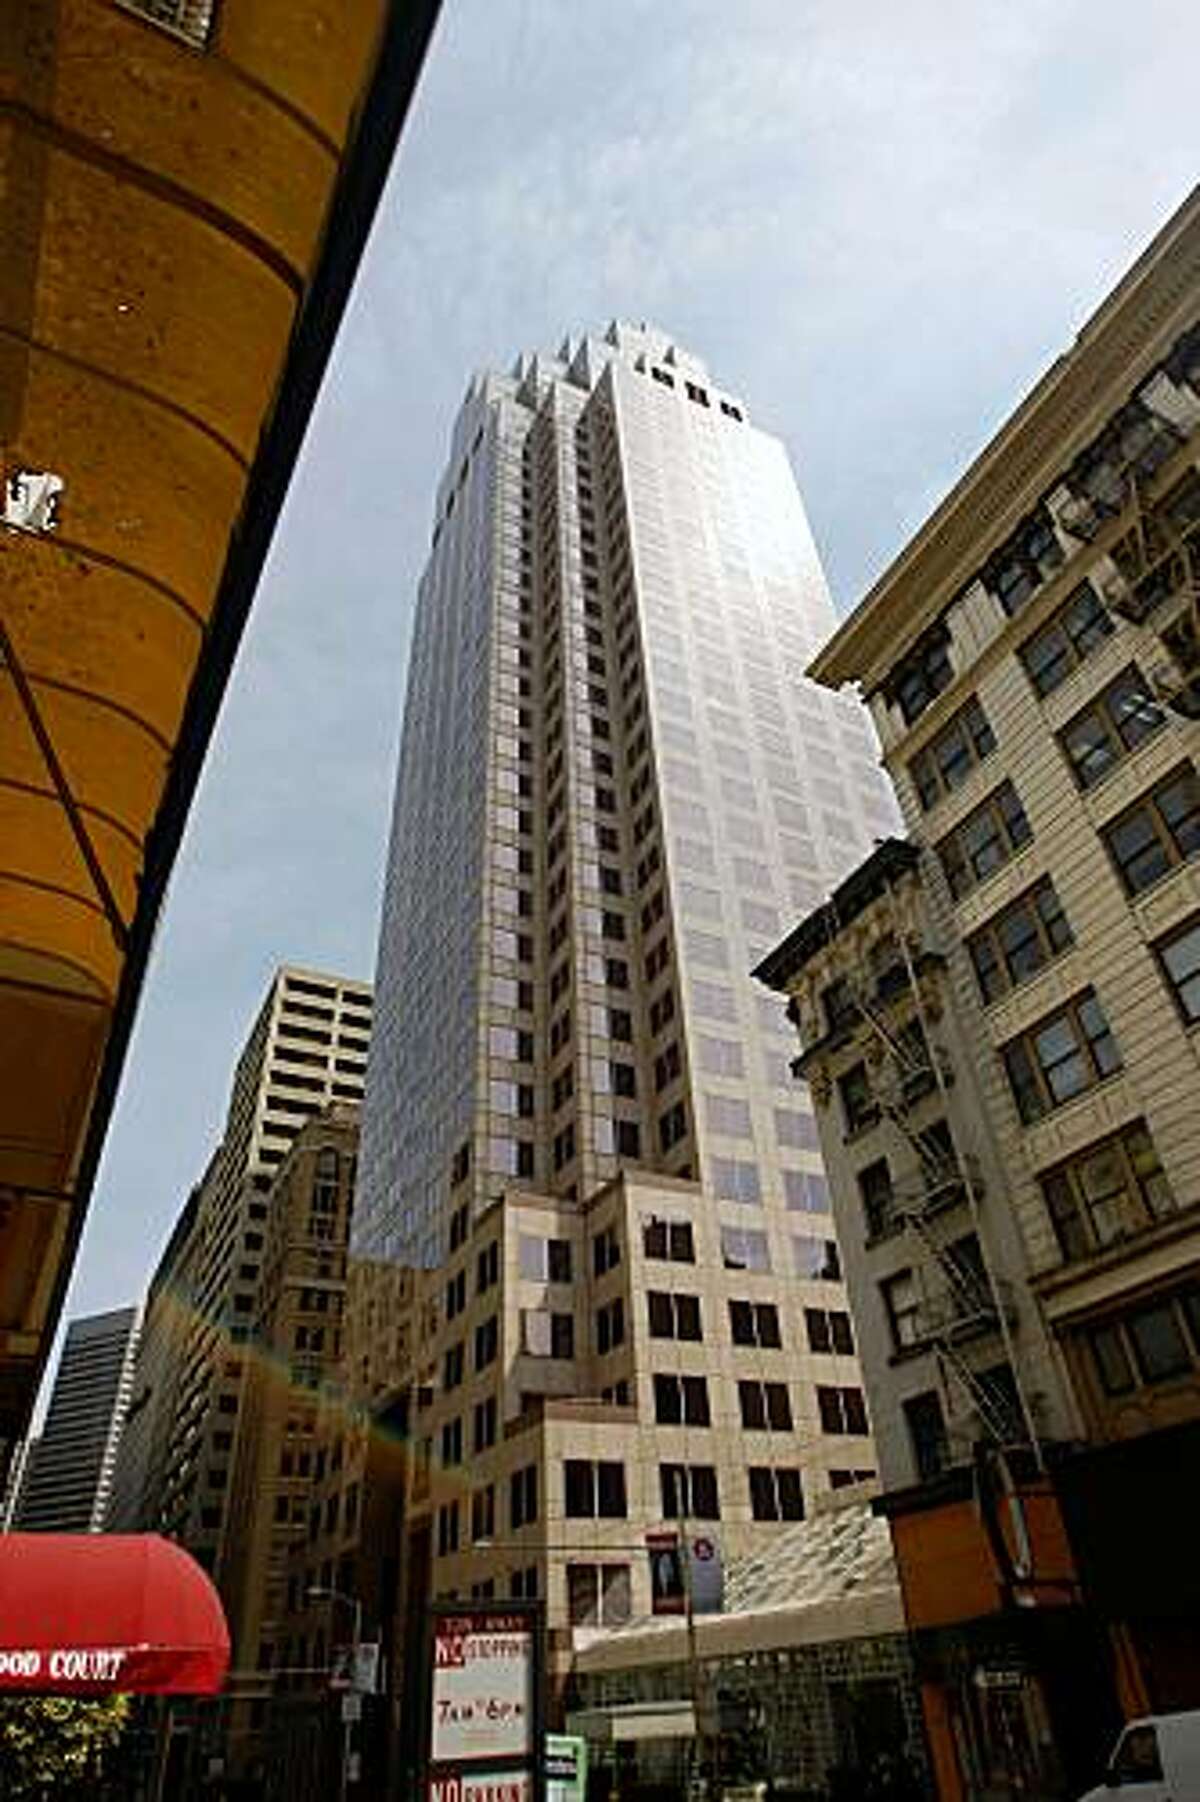 The building at 333 Bush street (center) photographed in San Francisco, Calif. on Monday April 13, 2009.